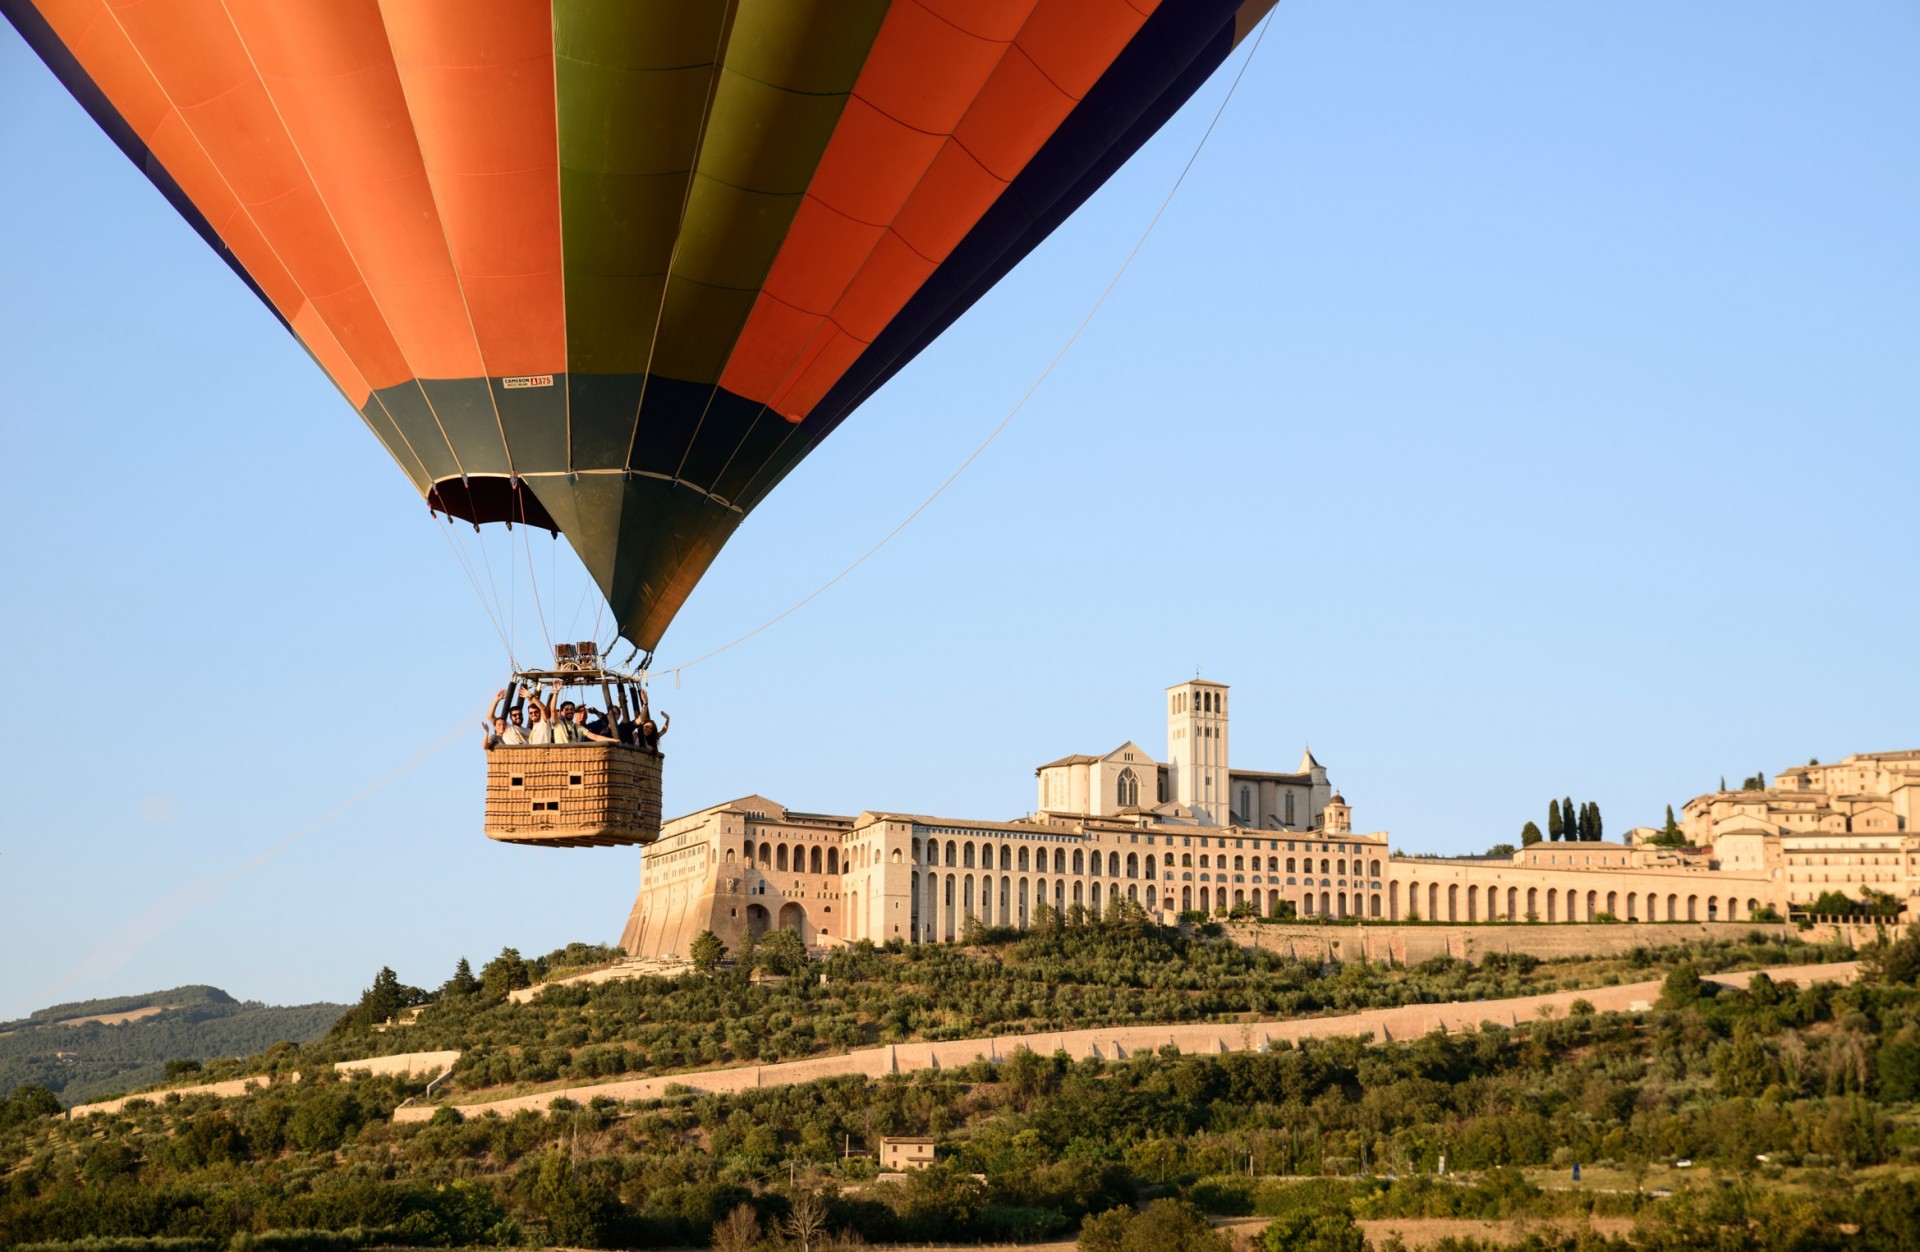 The most beautiful hot air balloon flight in the world!